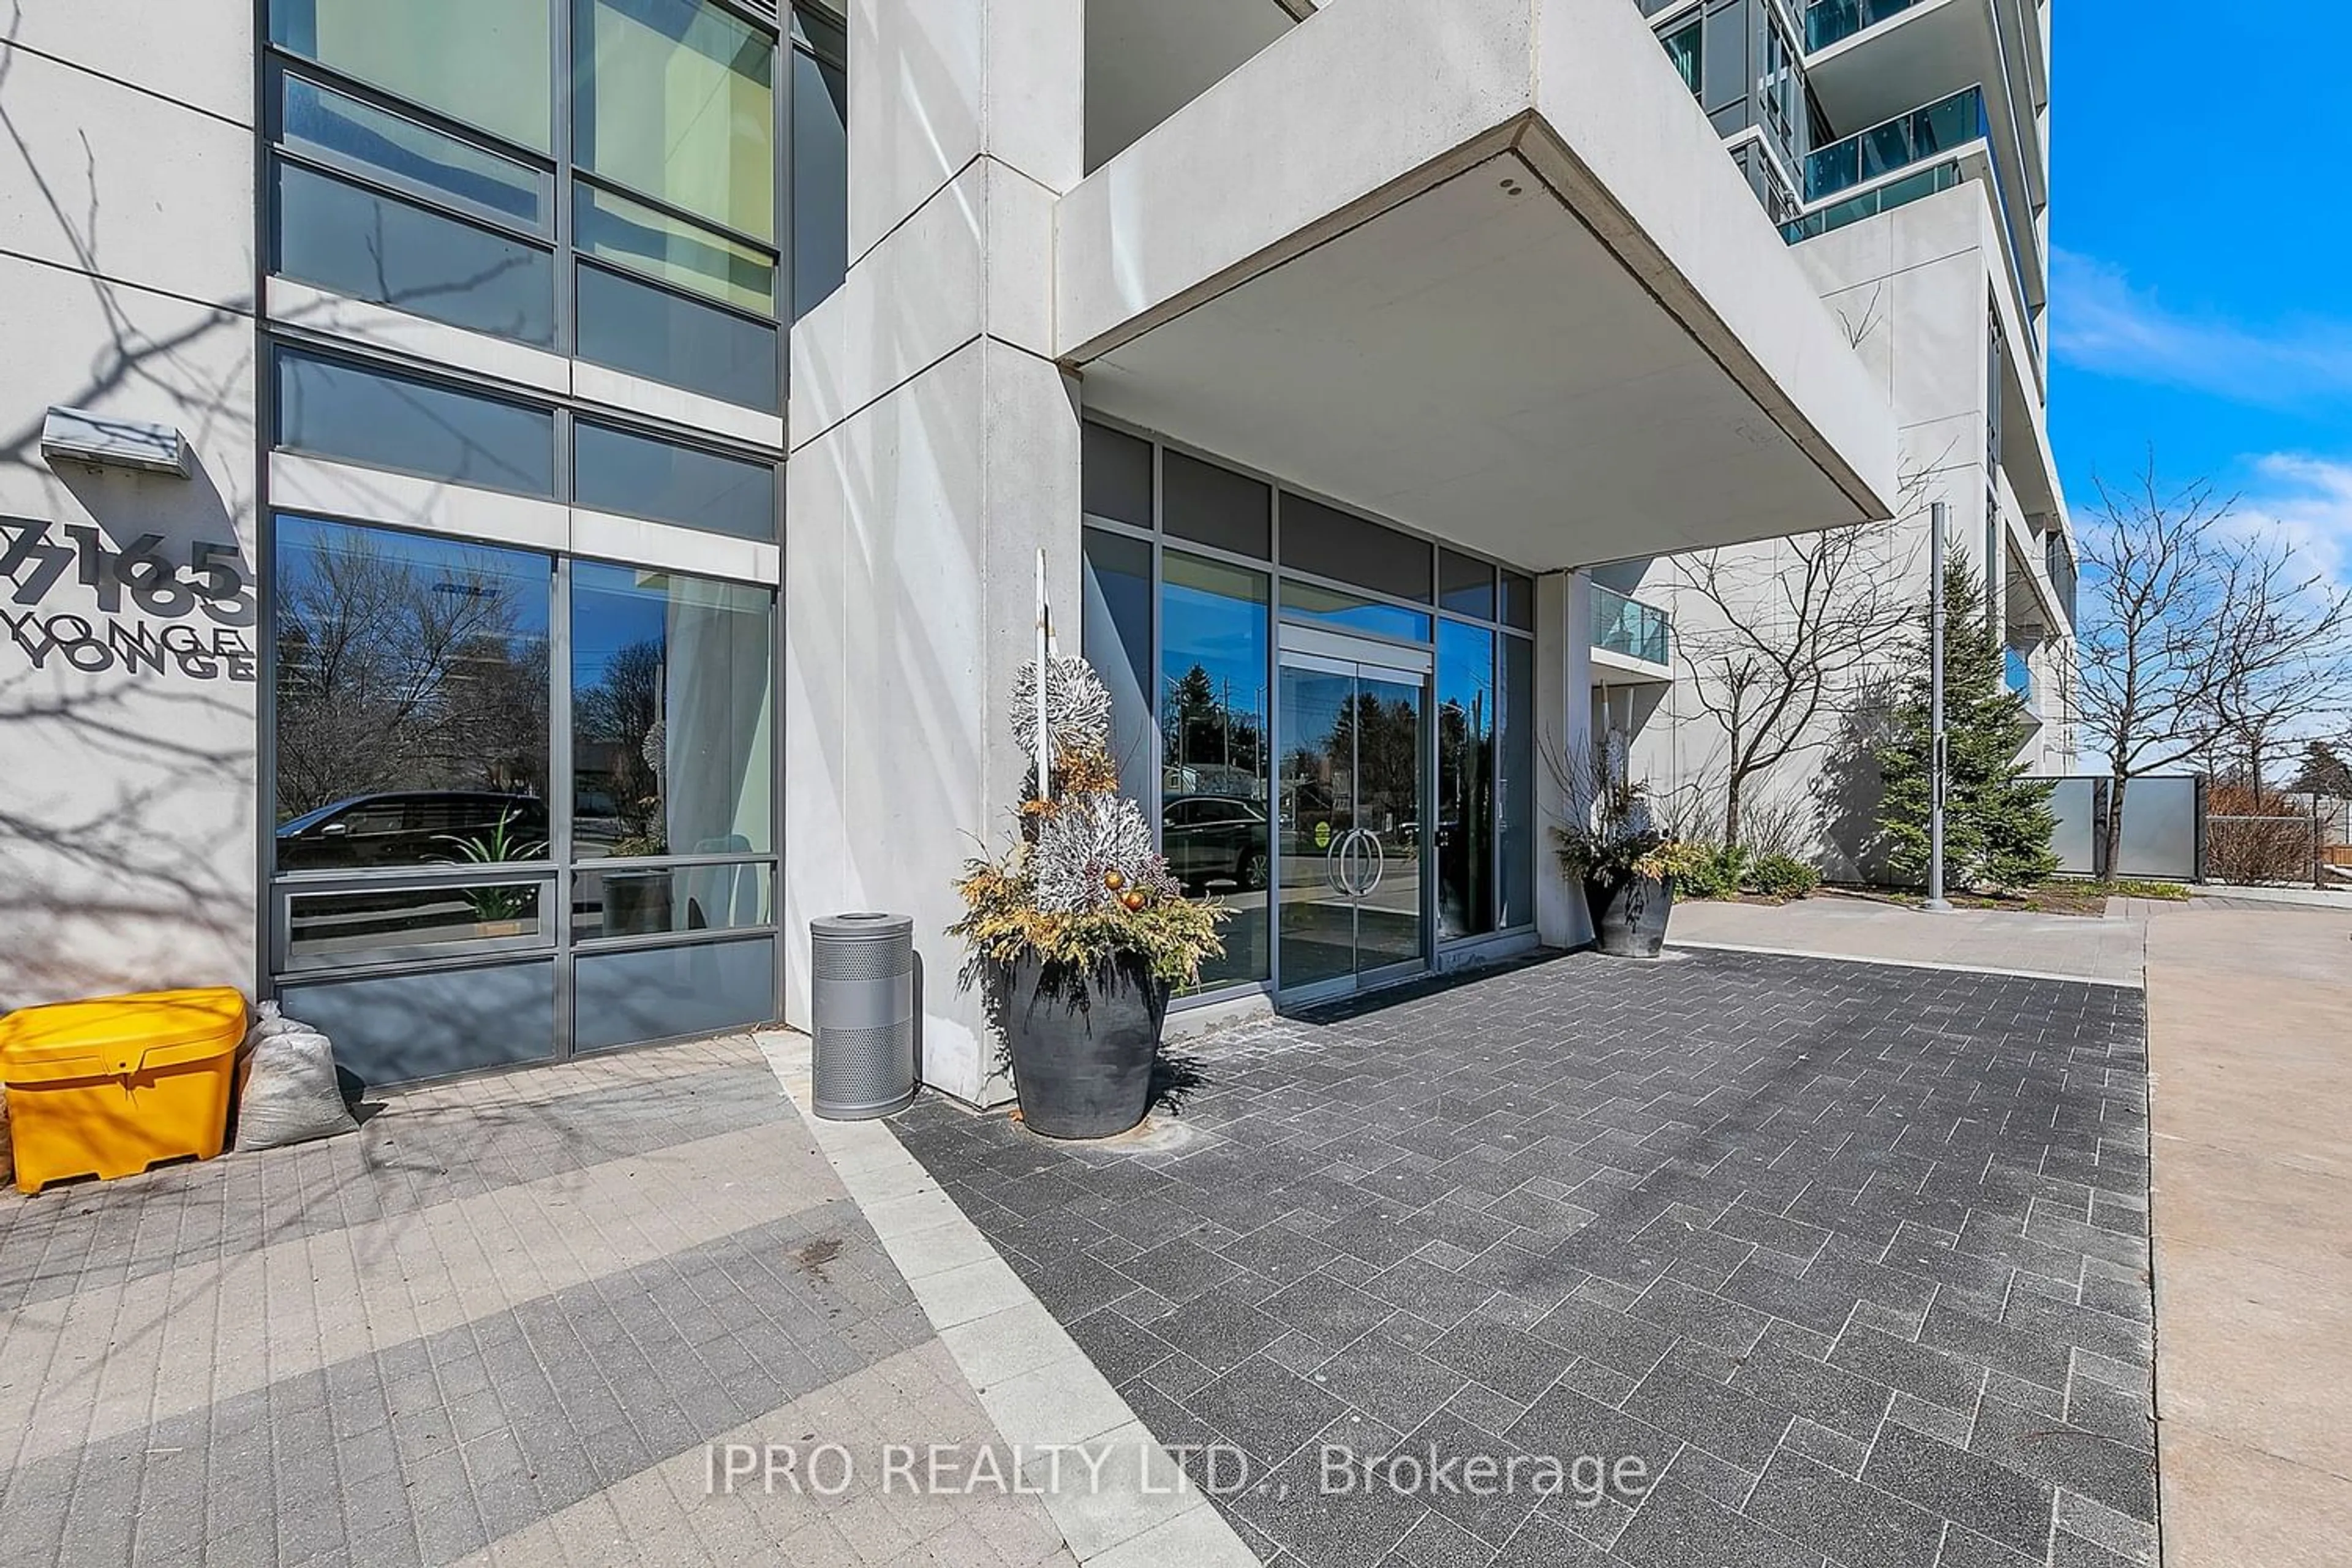 A pic from exterior of the house or condo for 7165 Yonge St #531, Markham Ontario L3T 0C9